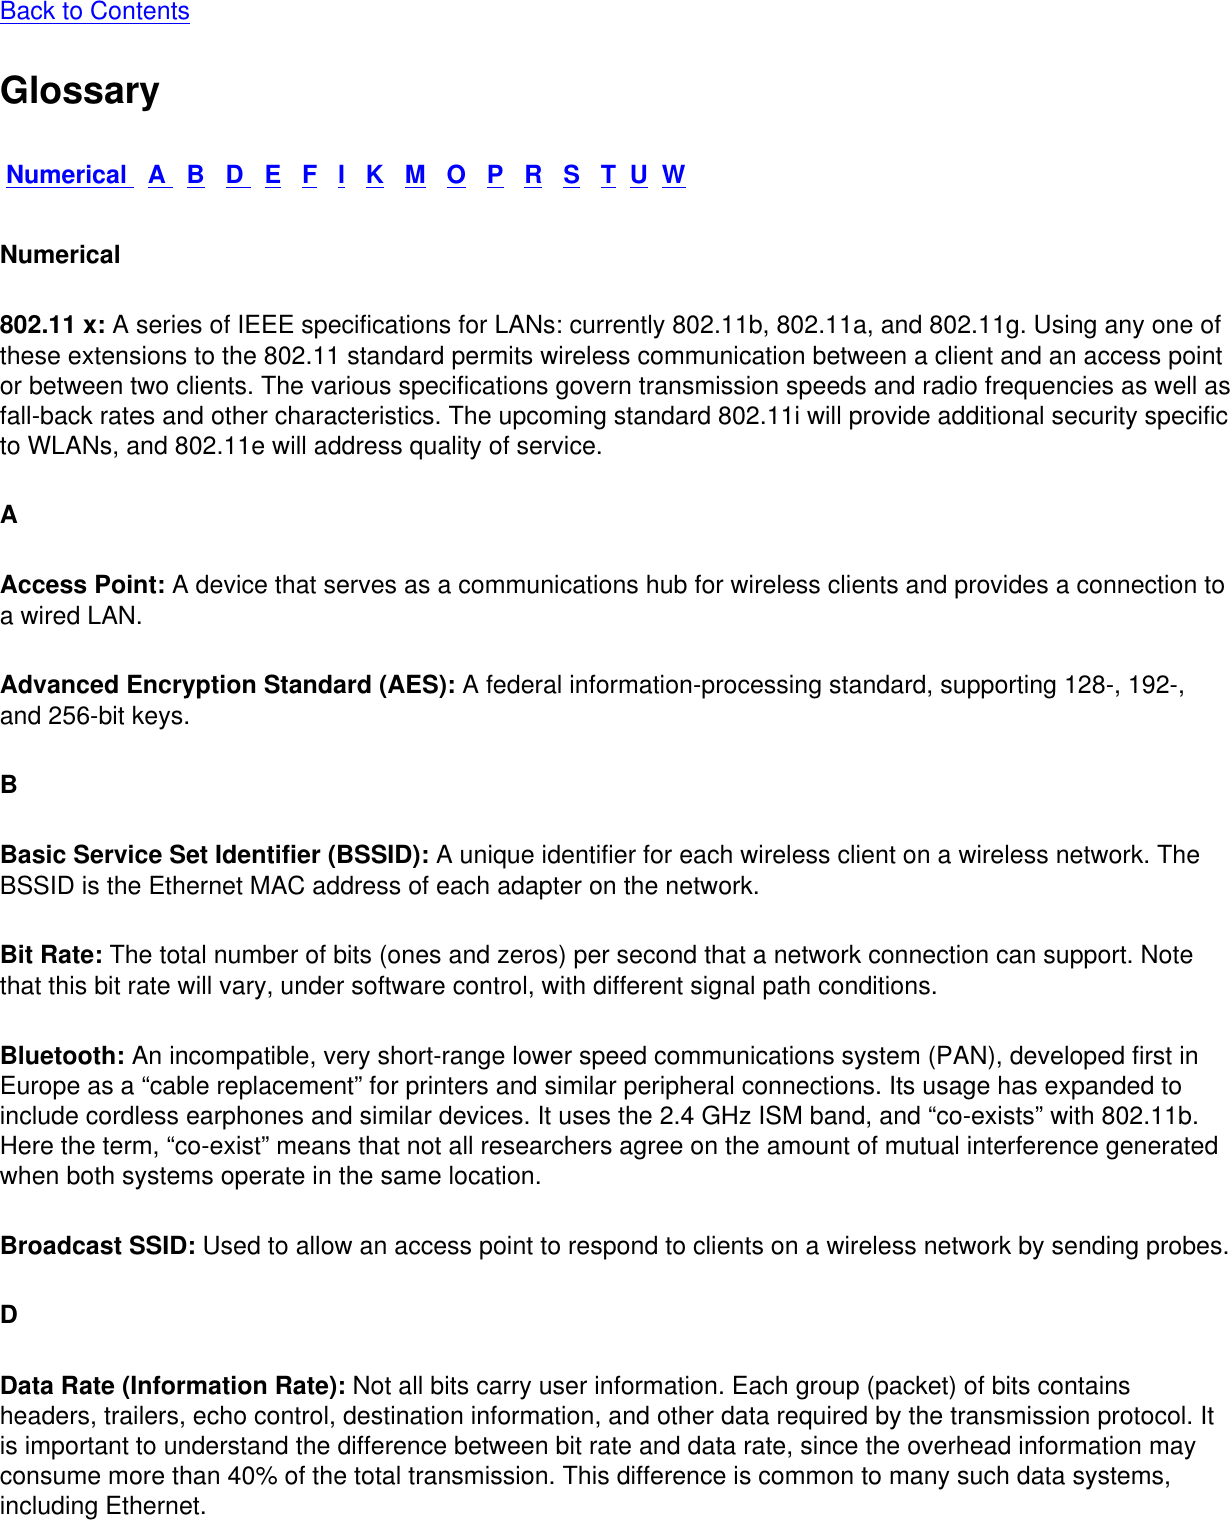 Back to Contents GlossaryNumerical   A   B   D   E   F   I   K   M   O   P   R   S   T  U  WNumerical802.11 x: A series of IEEE specifications for LANs: currently 802.11b, 802.11a, and 802.11g. Using any one of these extensions to the 802.11 standard permits wireless communication between a client and an access point or between two clients. The various specifications govern transmission speeds and radio frequencies as well as fall-back rates and other characteristics. The upcoming standard 802.11i will provide additional security specific to WLANs, and 802.11e will address quality of service. AAccess Point: A device that serves as a communications hub for wireless clients and provides a connection to a wired LAN. Advanced Encryption Standard (AES): A federal information-processing standard, supporting 128-, 192-, and 256-bit keys. BBasic Service Set Identifier (BSSID): A unique identifier for each wireless client on a wireless network. The BSSID is the Ethernet MAC address of each adapter on the network. Bit Rate: The total number of bits (ones and zeros) per second that a network connection can support. Note that this bit rate will vary, under software control, with different signal path conditions. Bluetooth: An incompatible, very short-range lower speed communications system (PAN), developed first in Europe as a “cable replacement” for printers and similar peripheral connections. Its usage has expanded to include cordless earphones and similar devices. It uses the 2.4 GHz ISM band, and “co-exists” with 802.11b. Here the term, “co-exist” means that not all researchers agree on the amount of mutual interference generated when both systems operate in the same location. Broadcast SSID: Used to allow an access point to respond to clients on a wireless network by sending probes. DData Rate (Information Rate): Not all bits carry user information. Each group (packet) of bits contains headers, trailers, echo control, destination information, and other data required by the transmission protocol. It is important to understand the difference between bit rate and data rate, since the overhead information may consume more than 40% of the total transmission. This difference is common to many such data systems, including Ethernet. 